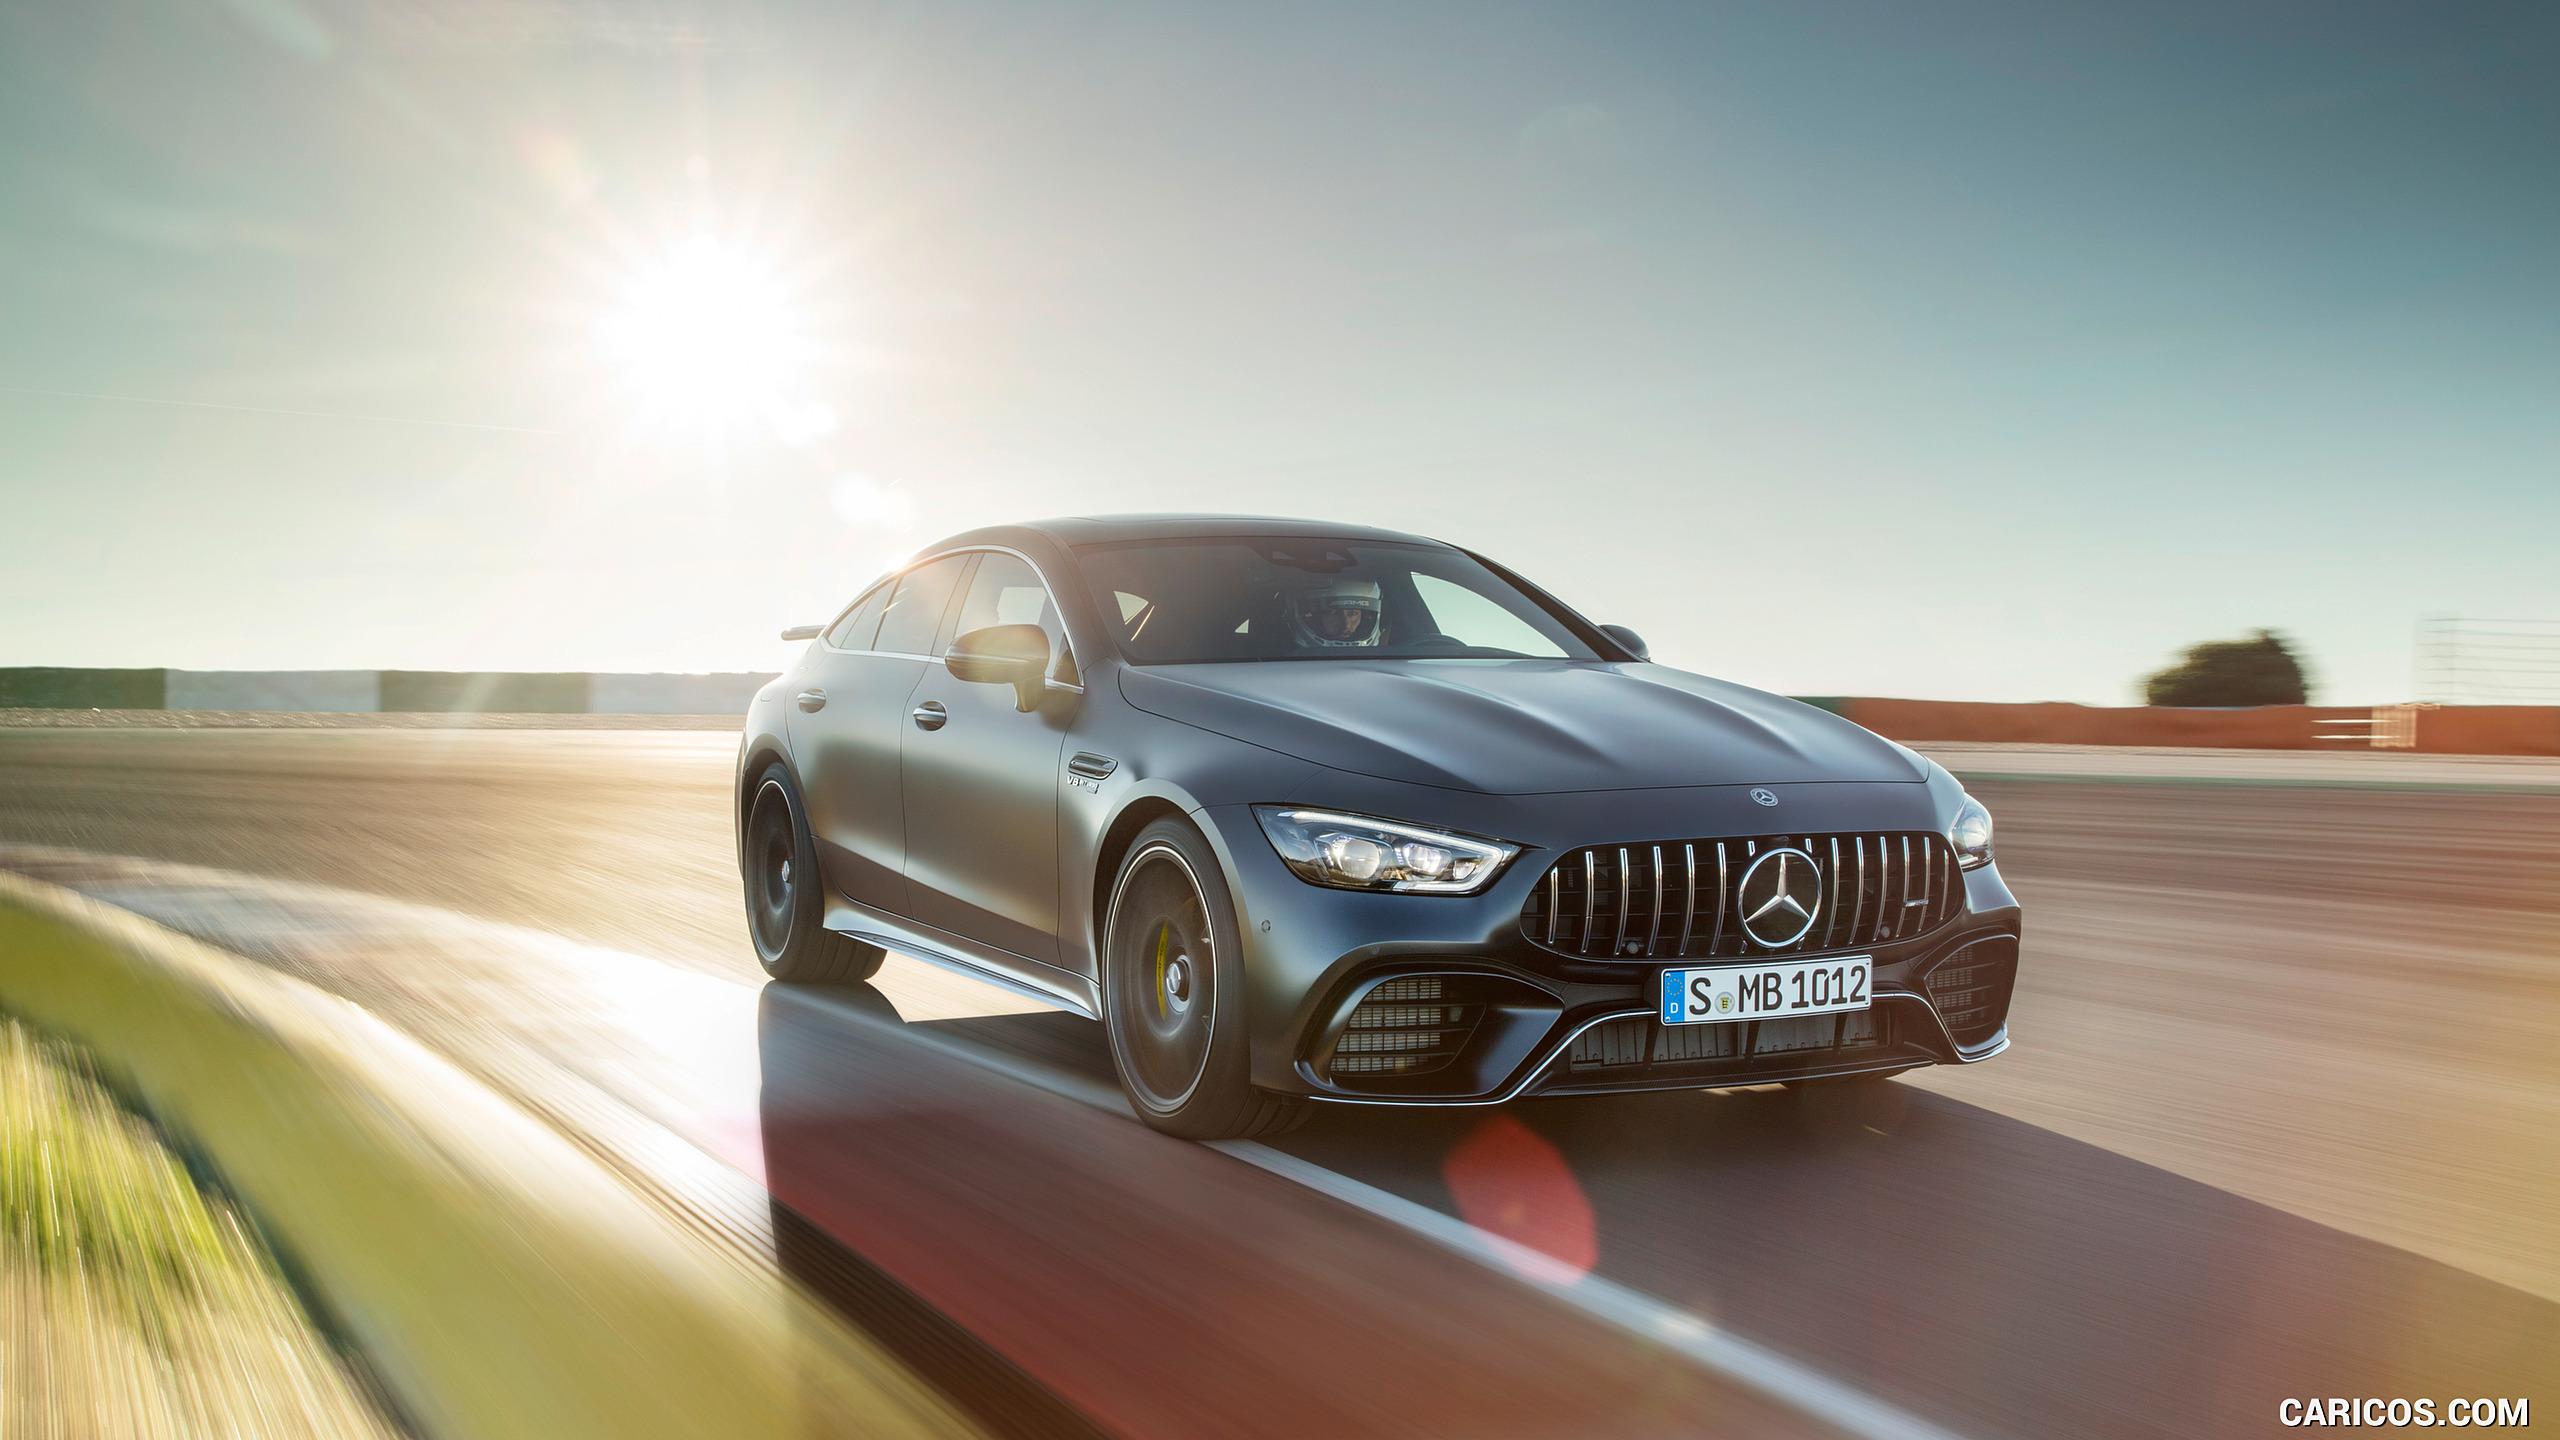 Mercedes AMG GT 63 S 4MATIC+ 4 Door Coupe Color: Graphite